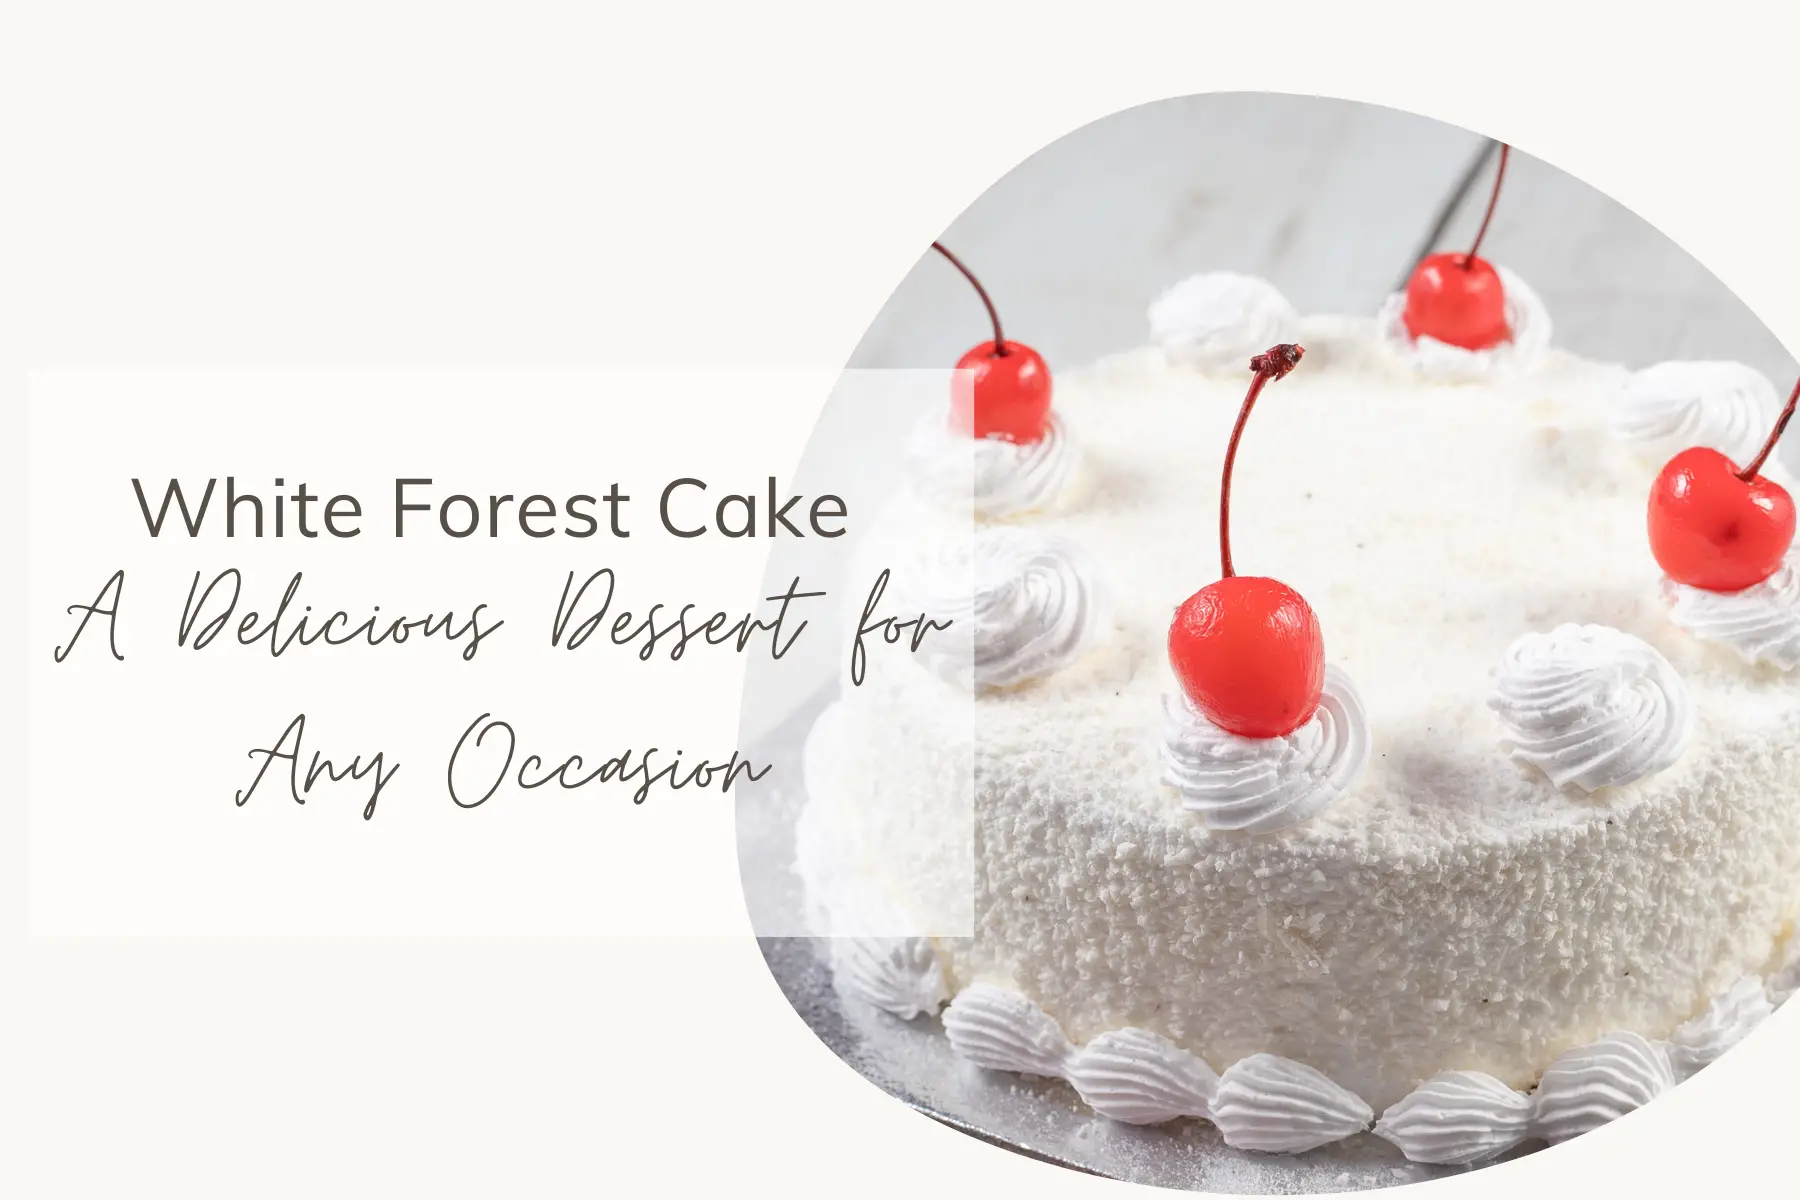 White Forest Cake: A Delicious Dessert for Any Occasion